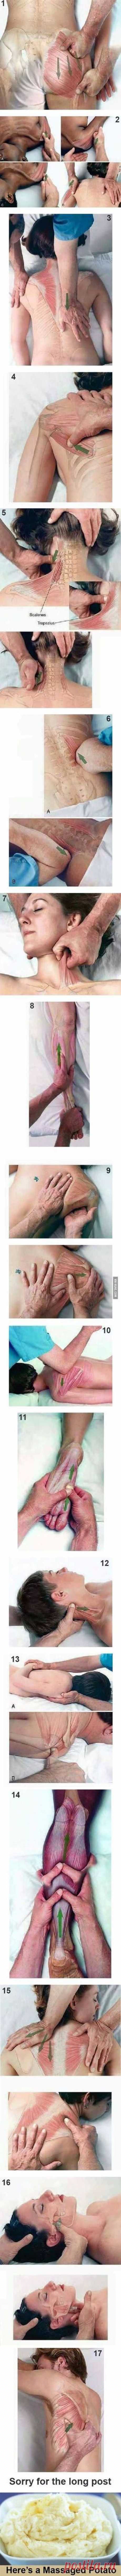 How to give a great massage